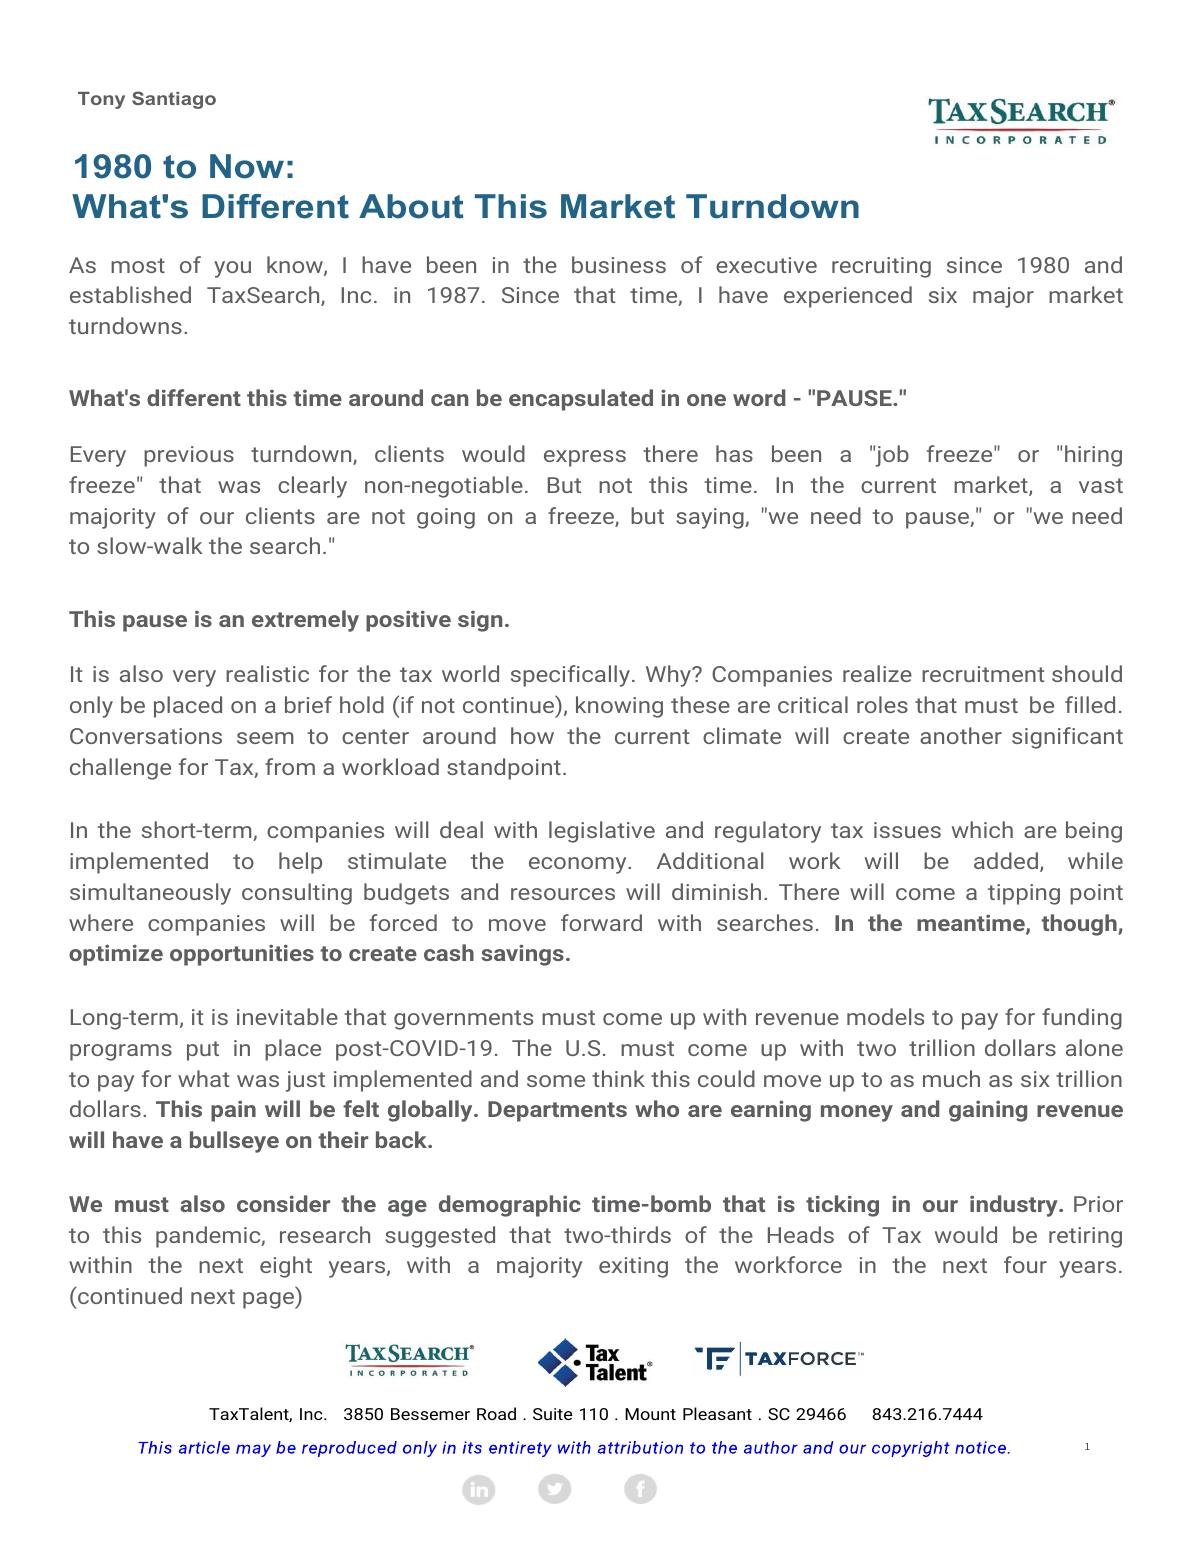 What's Different About This Market Turndown